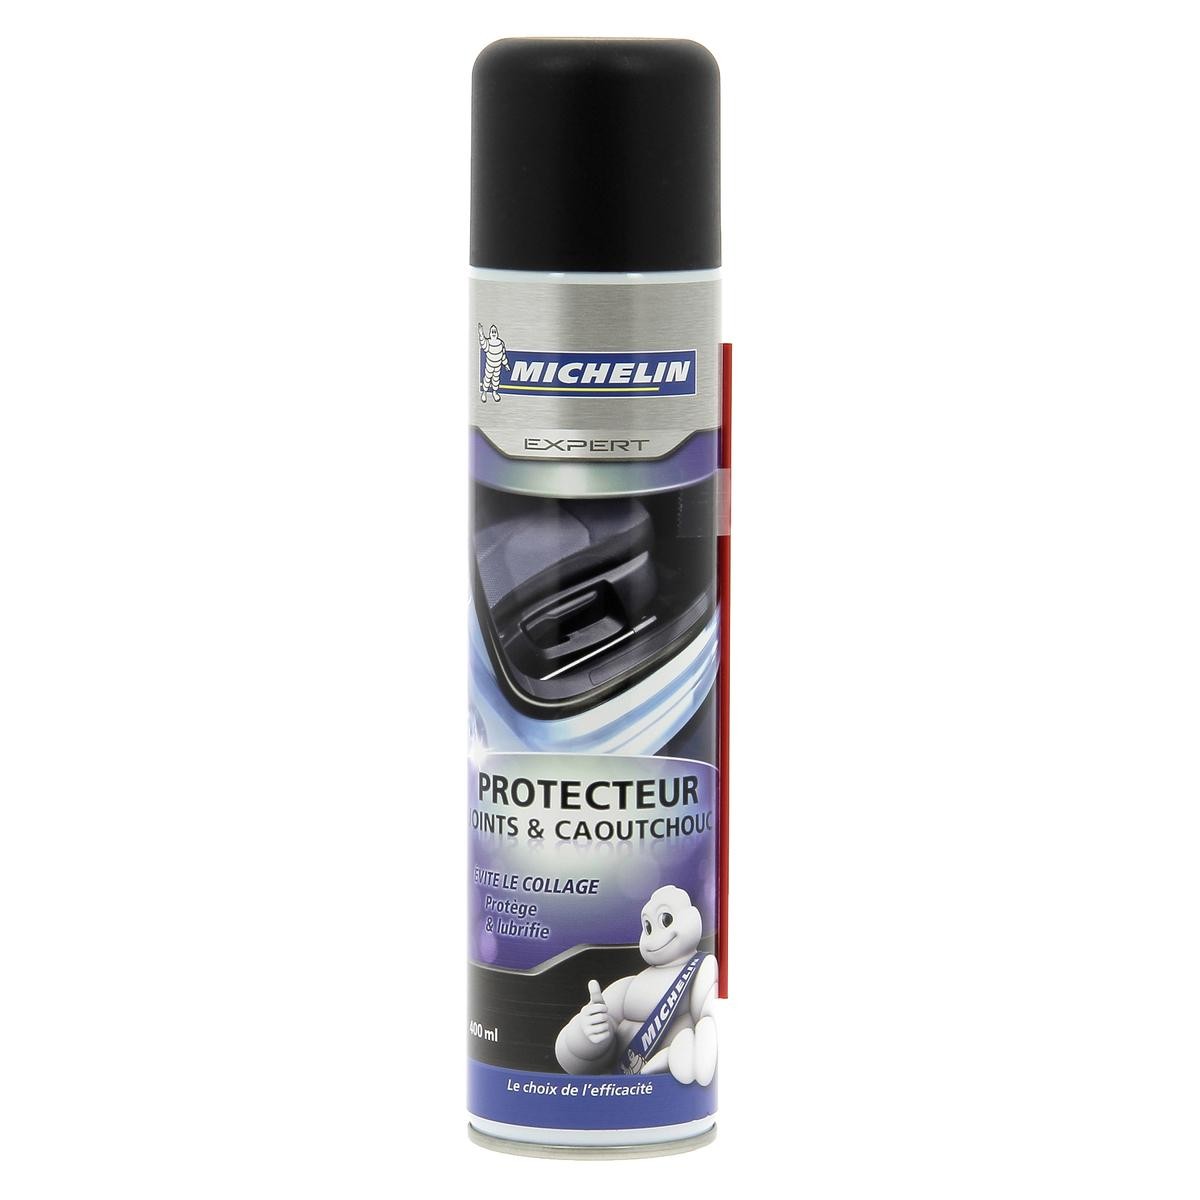 Michelin Expert 009455 Rubber Care Products aerosol, Capacity: 400ml